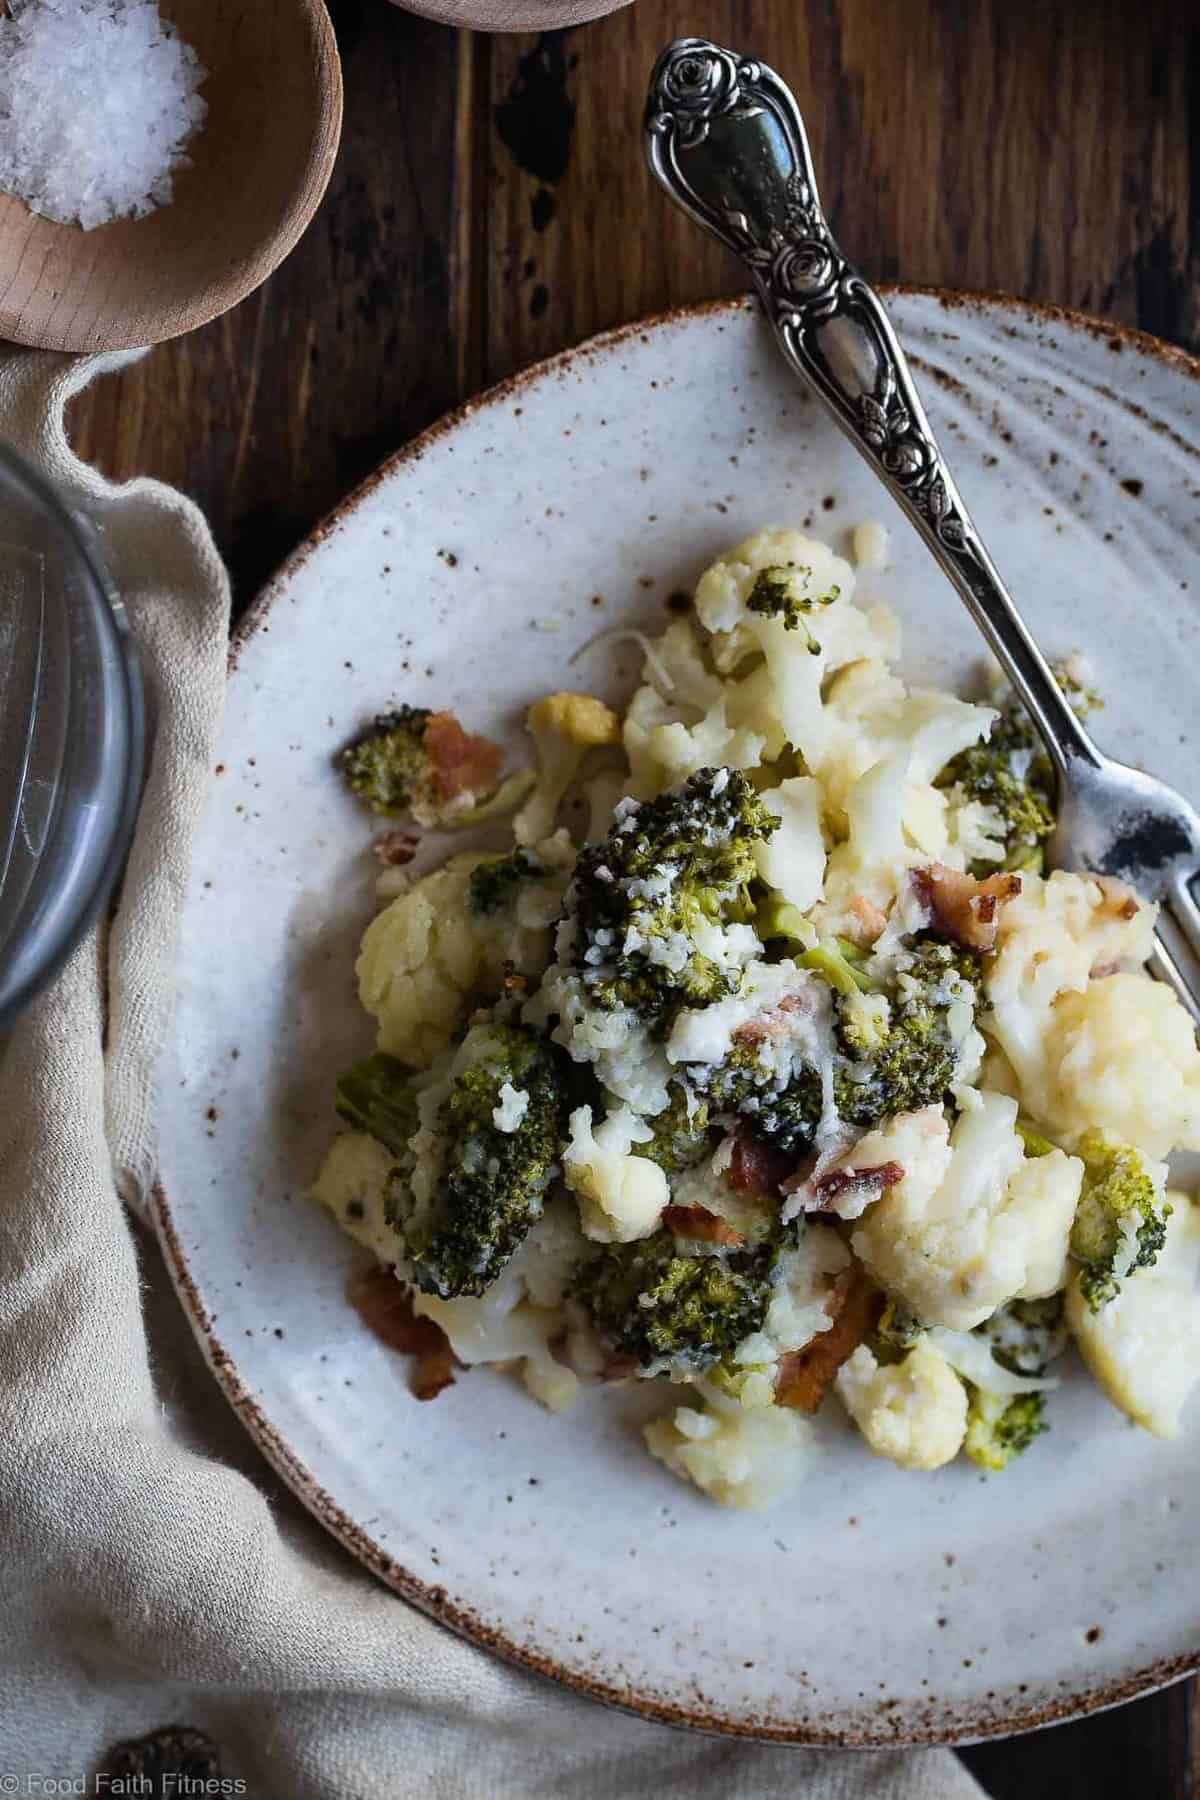 Easy Cheesy Loaded Broccoli Cauliflower Casserole - THE side dish that will make your family love vegetables - even picky eaters! Low carb, gluten/grain/sugar free and keto friendly too! | #Foodfaithfitness | #Glutenfree #Keto #Lowcarb #Cauliflower #Healthy